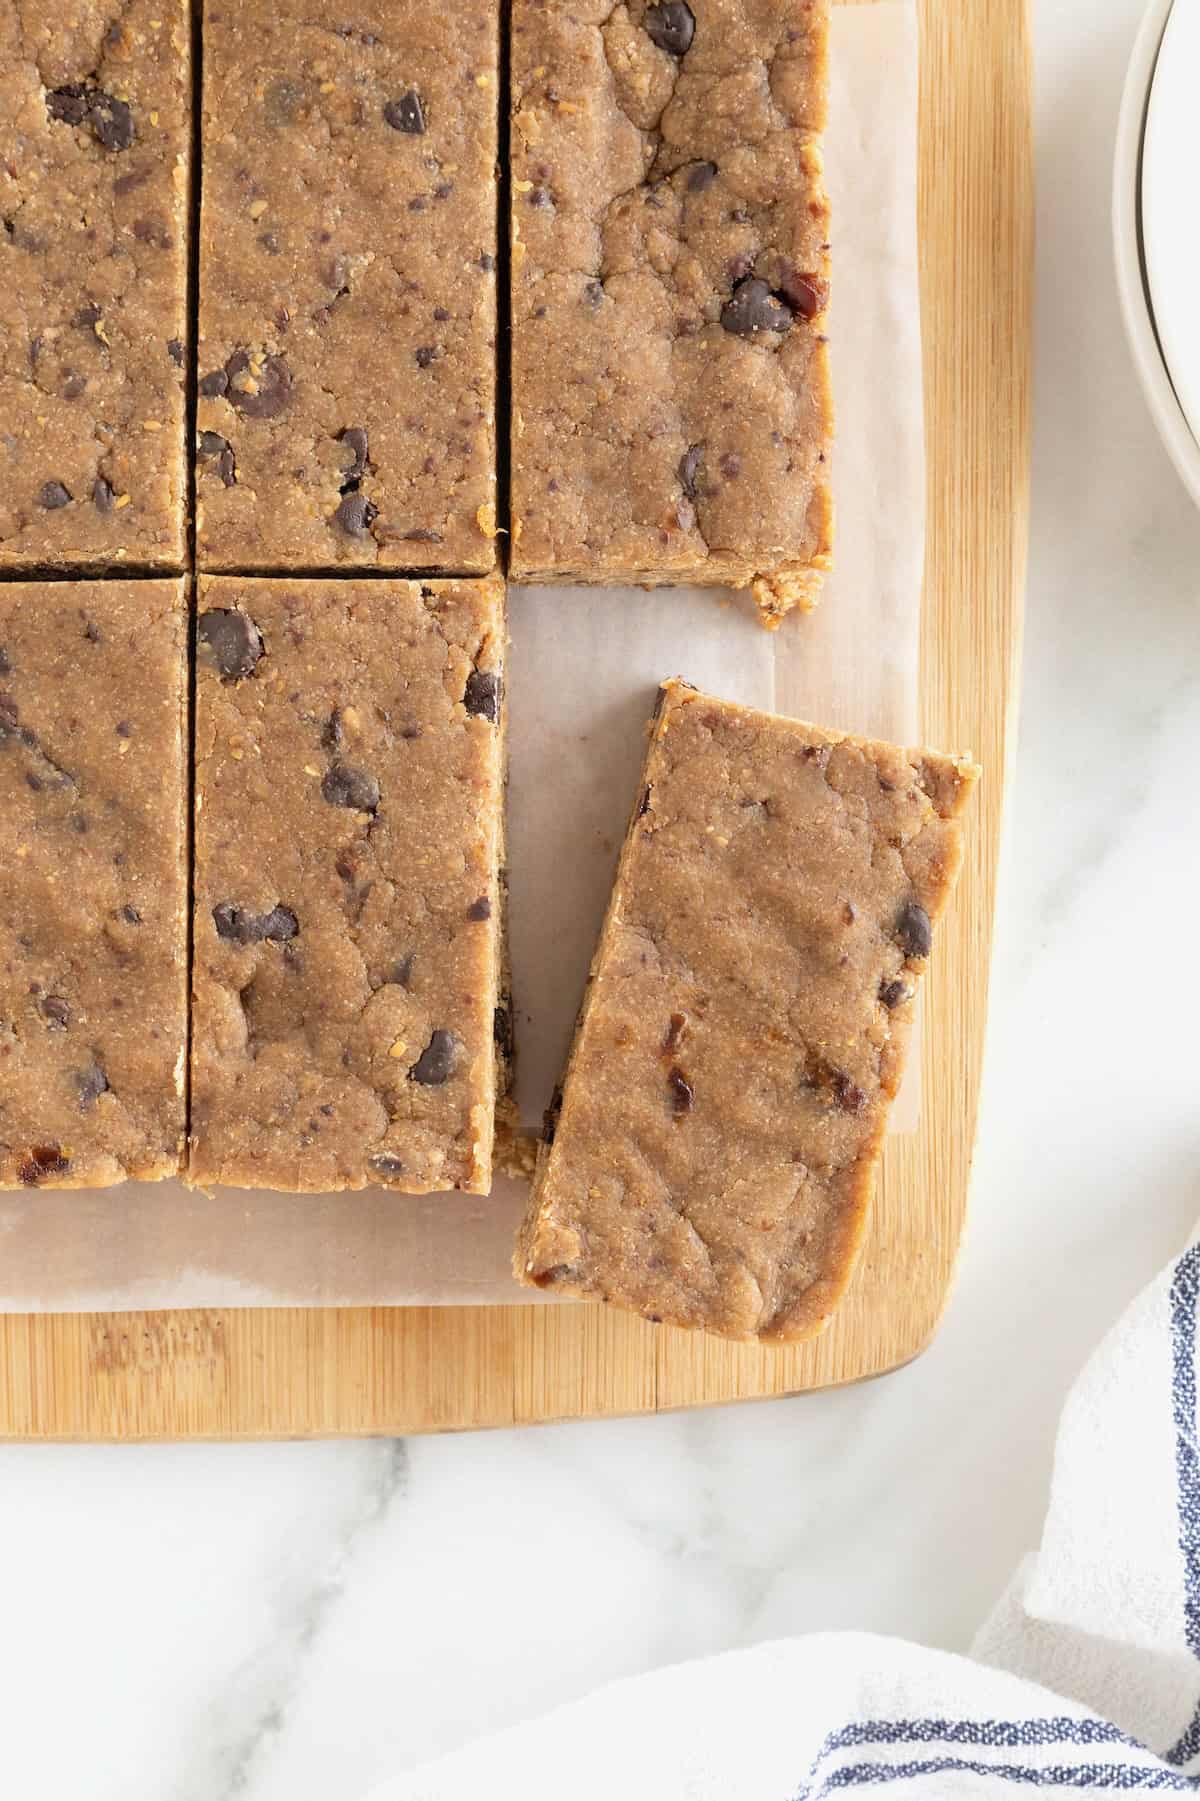 Six peanut butter chocolate chip breakfast bars on a parchment lined light wood cutting board.